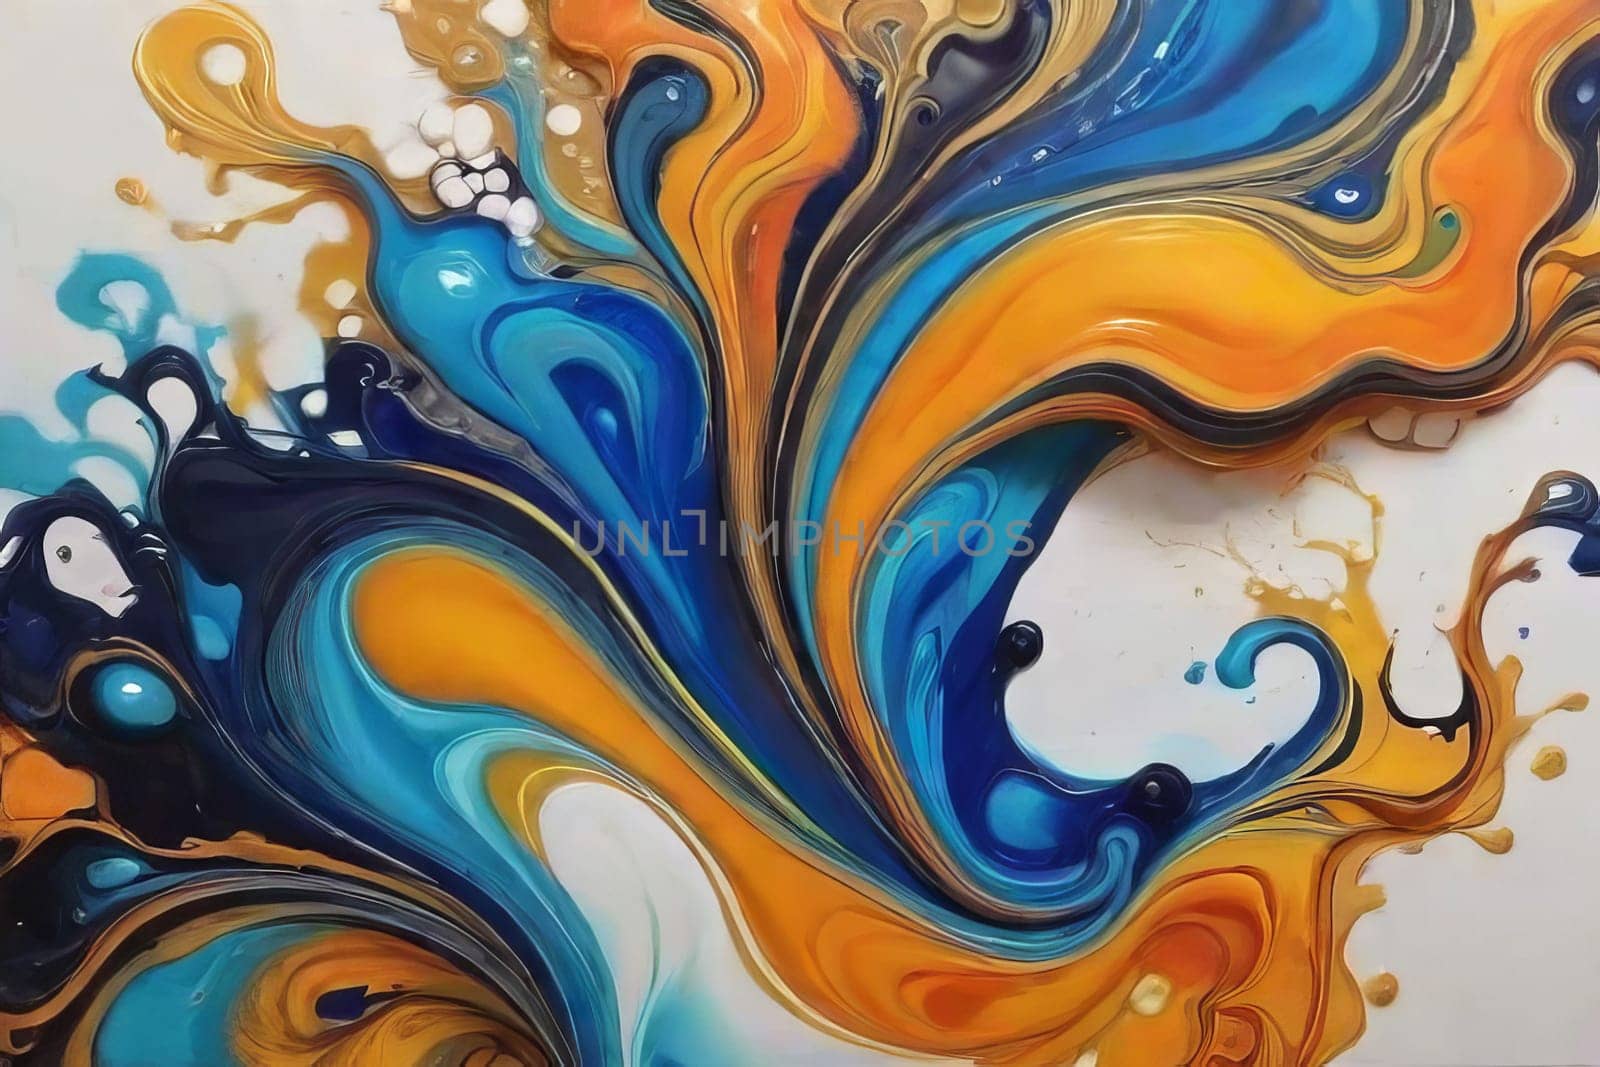 Acrylic illustration in the style of fluid art. An abstract banner. by Annu1tochka